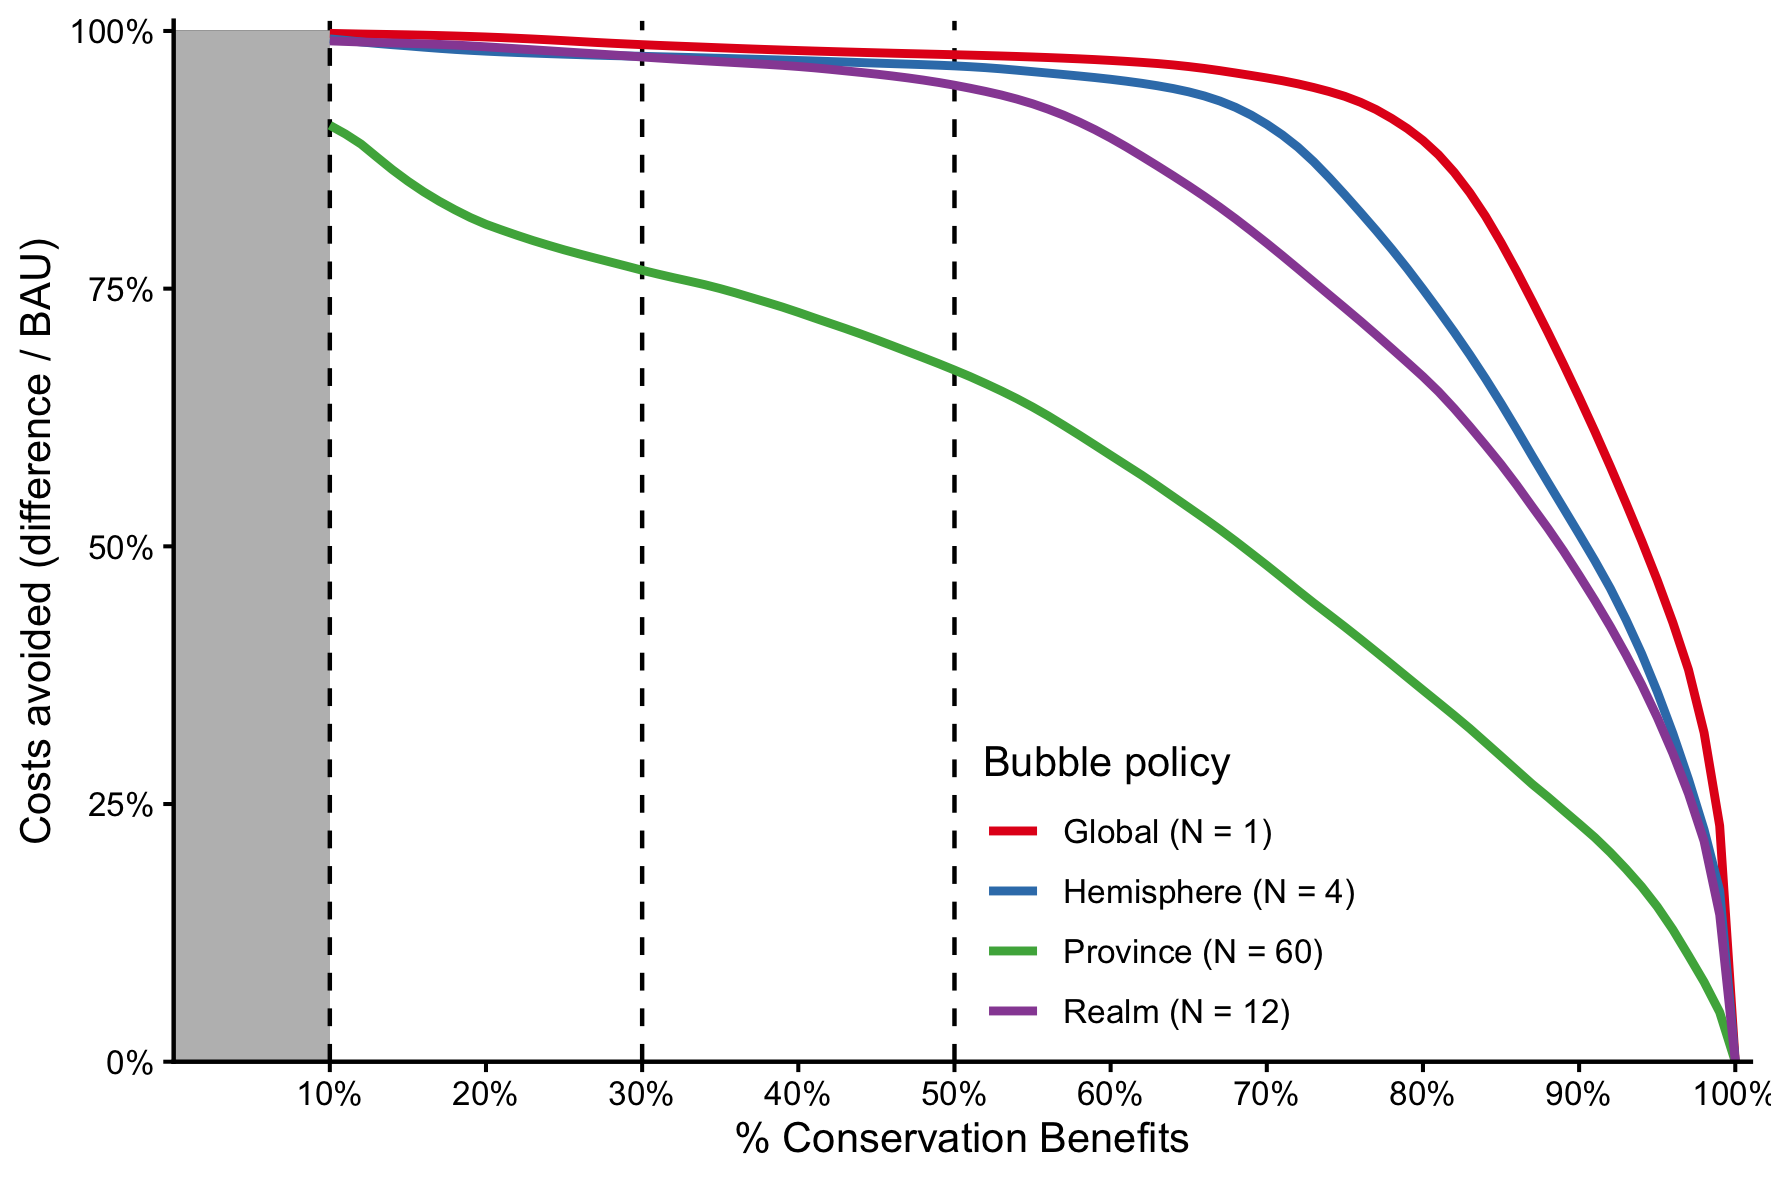 Gains from trade (y-axis) for a range of conservation targets (10% to 99%; x-axis), under four different bubble policies (colors). Each line shows the percent of the costs that can be avoided by allowing trade between nations within each segment. The dashed horizontal lines mark the often-cited conservation targets of 10%, 30%, and 50%.